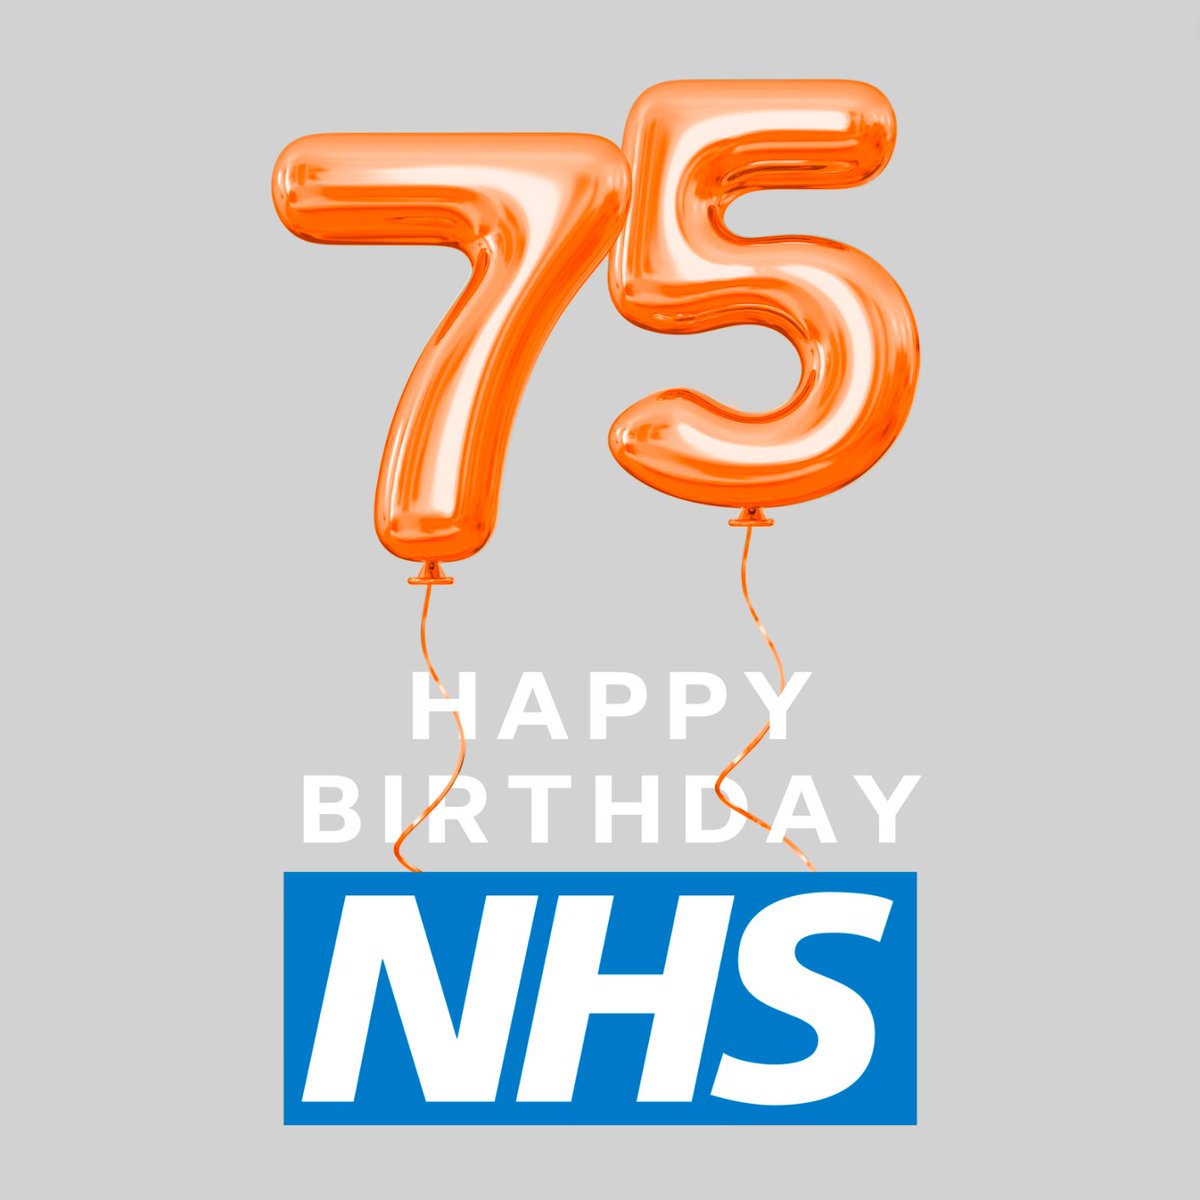 Happy birthday #NHS75! 🎂 The #NHS is part of the fabric of the UK and we have been proud to partner with them over the last 25 years of that journey, working together to transform the healthcare experience for all.